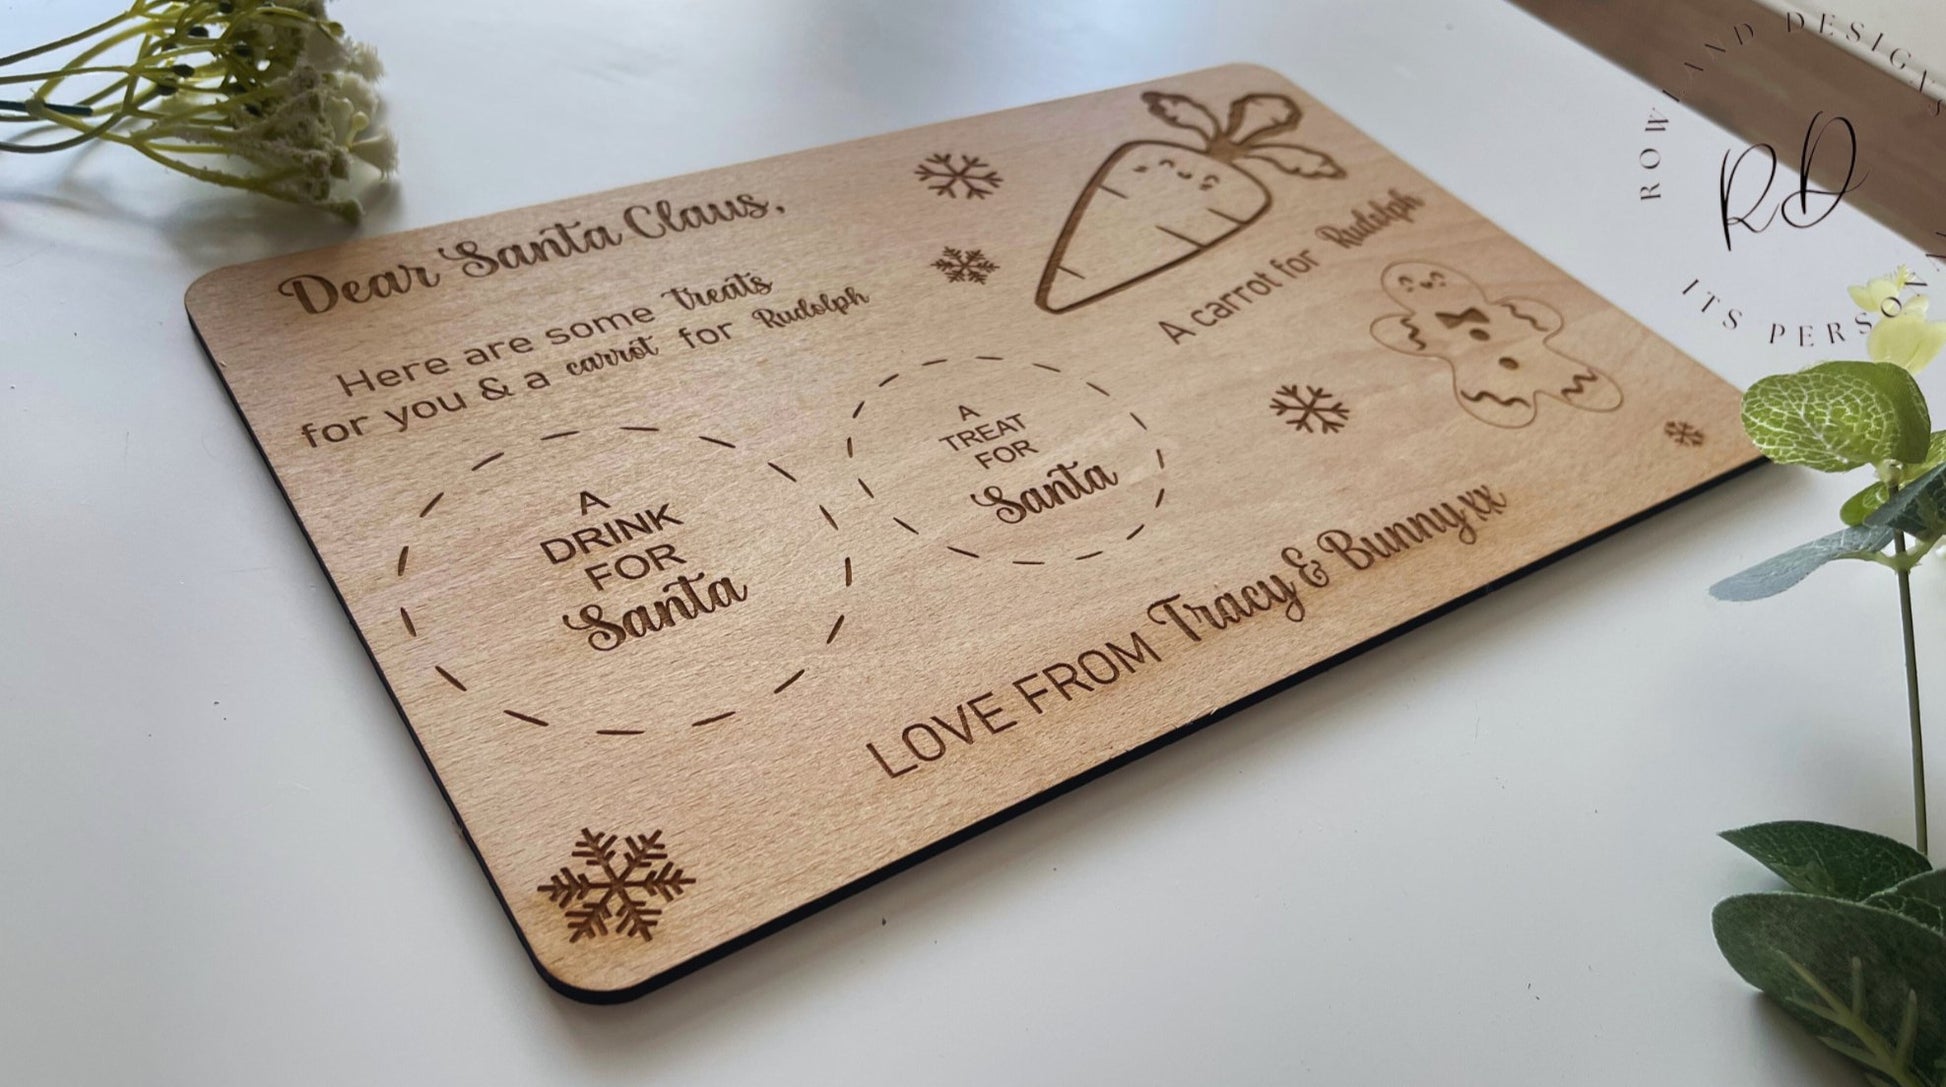 Make Christmas Eve extra special with our Personalised Santa Plate. Customisable for up to three names, complete with dedicated sections for Santa's treats, drink, and Rudolf's carrot, embellished with delightful gingerbread and snowflake engravings. Crafted from 4mm beech veneer, sized at 290mm x 185mm.